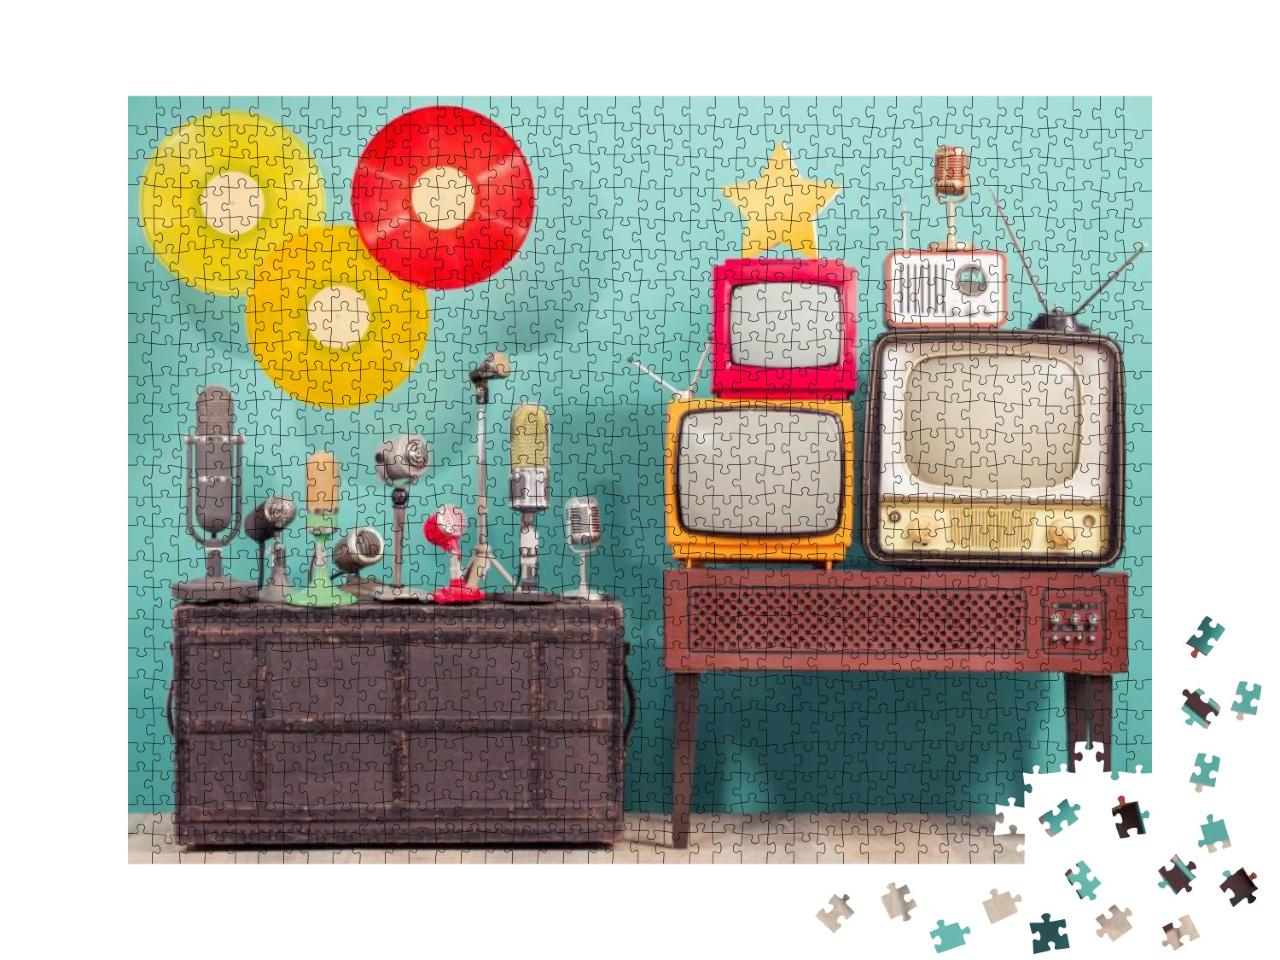 Retro Studio Microphones, Outdated Tv Set, Old Fm Radio... Jigsaw Puzzle with 1000 pieces